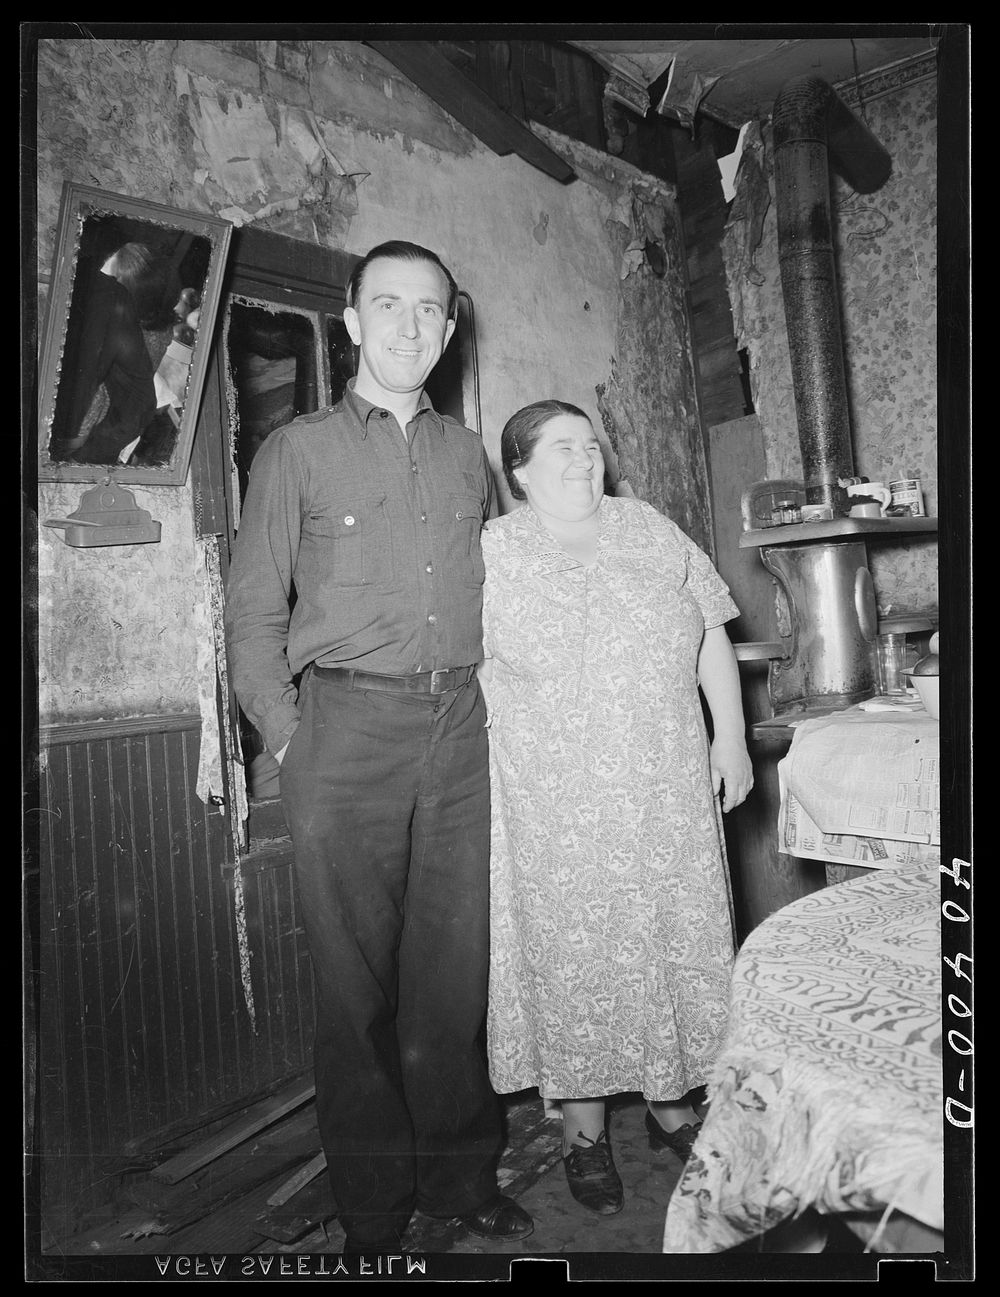 Gilberton, Pennsylvania. Marcella Urban and a friend. Sourced from the Library of Congress.